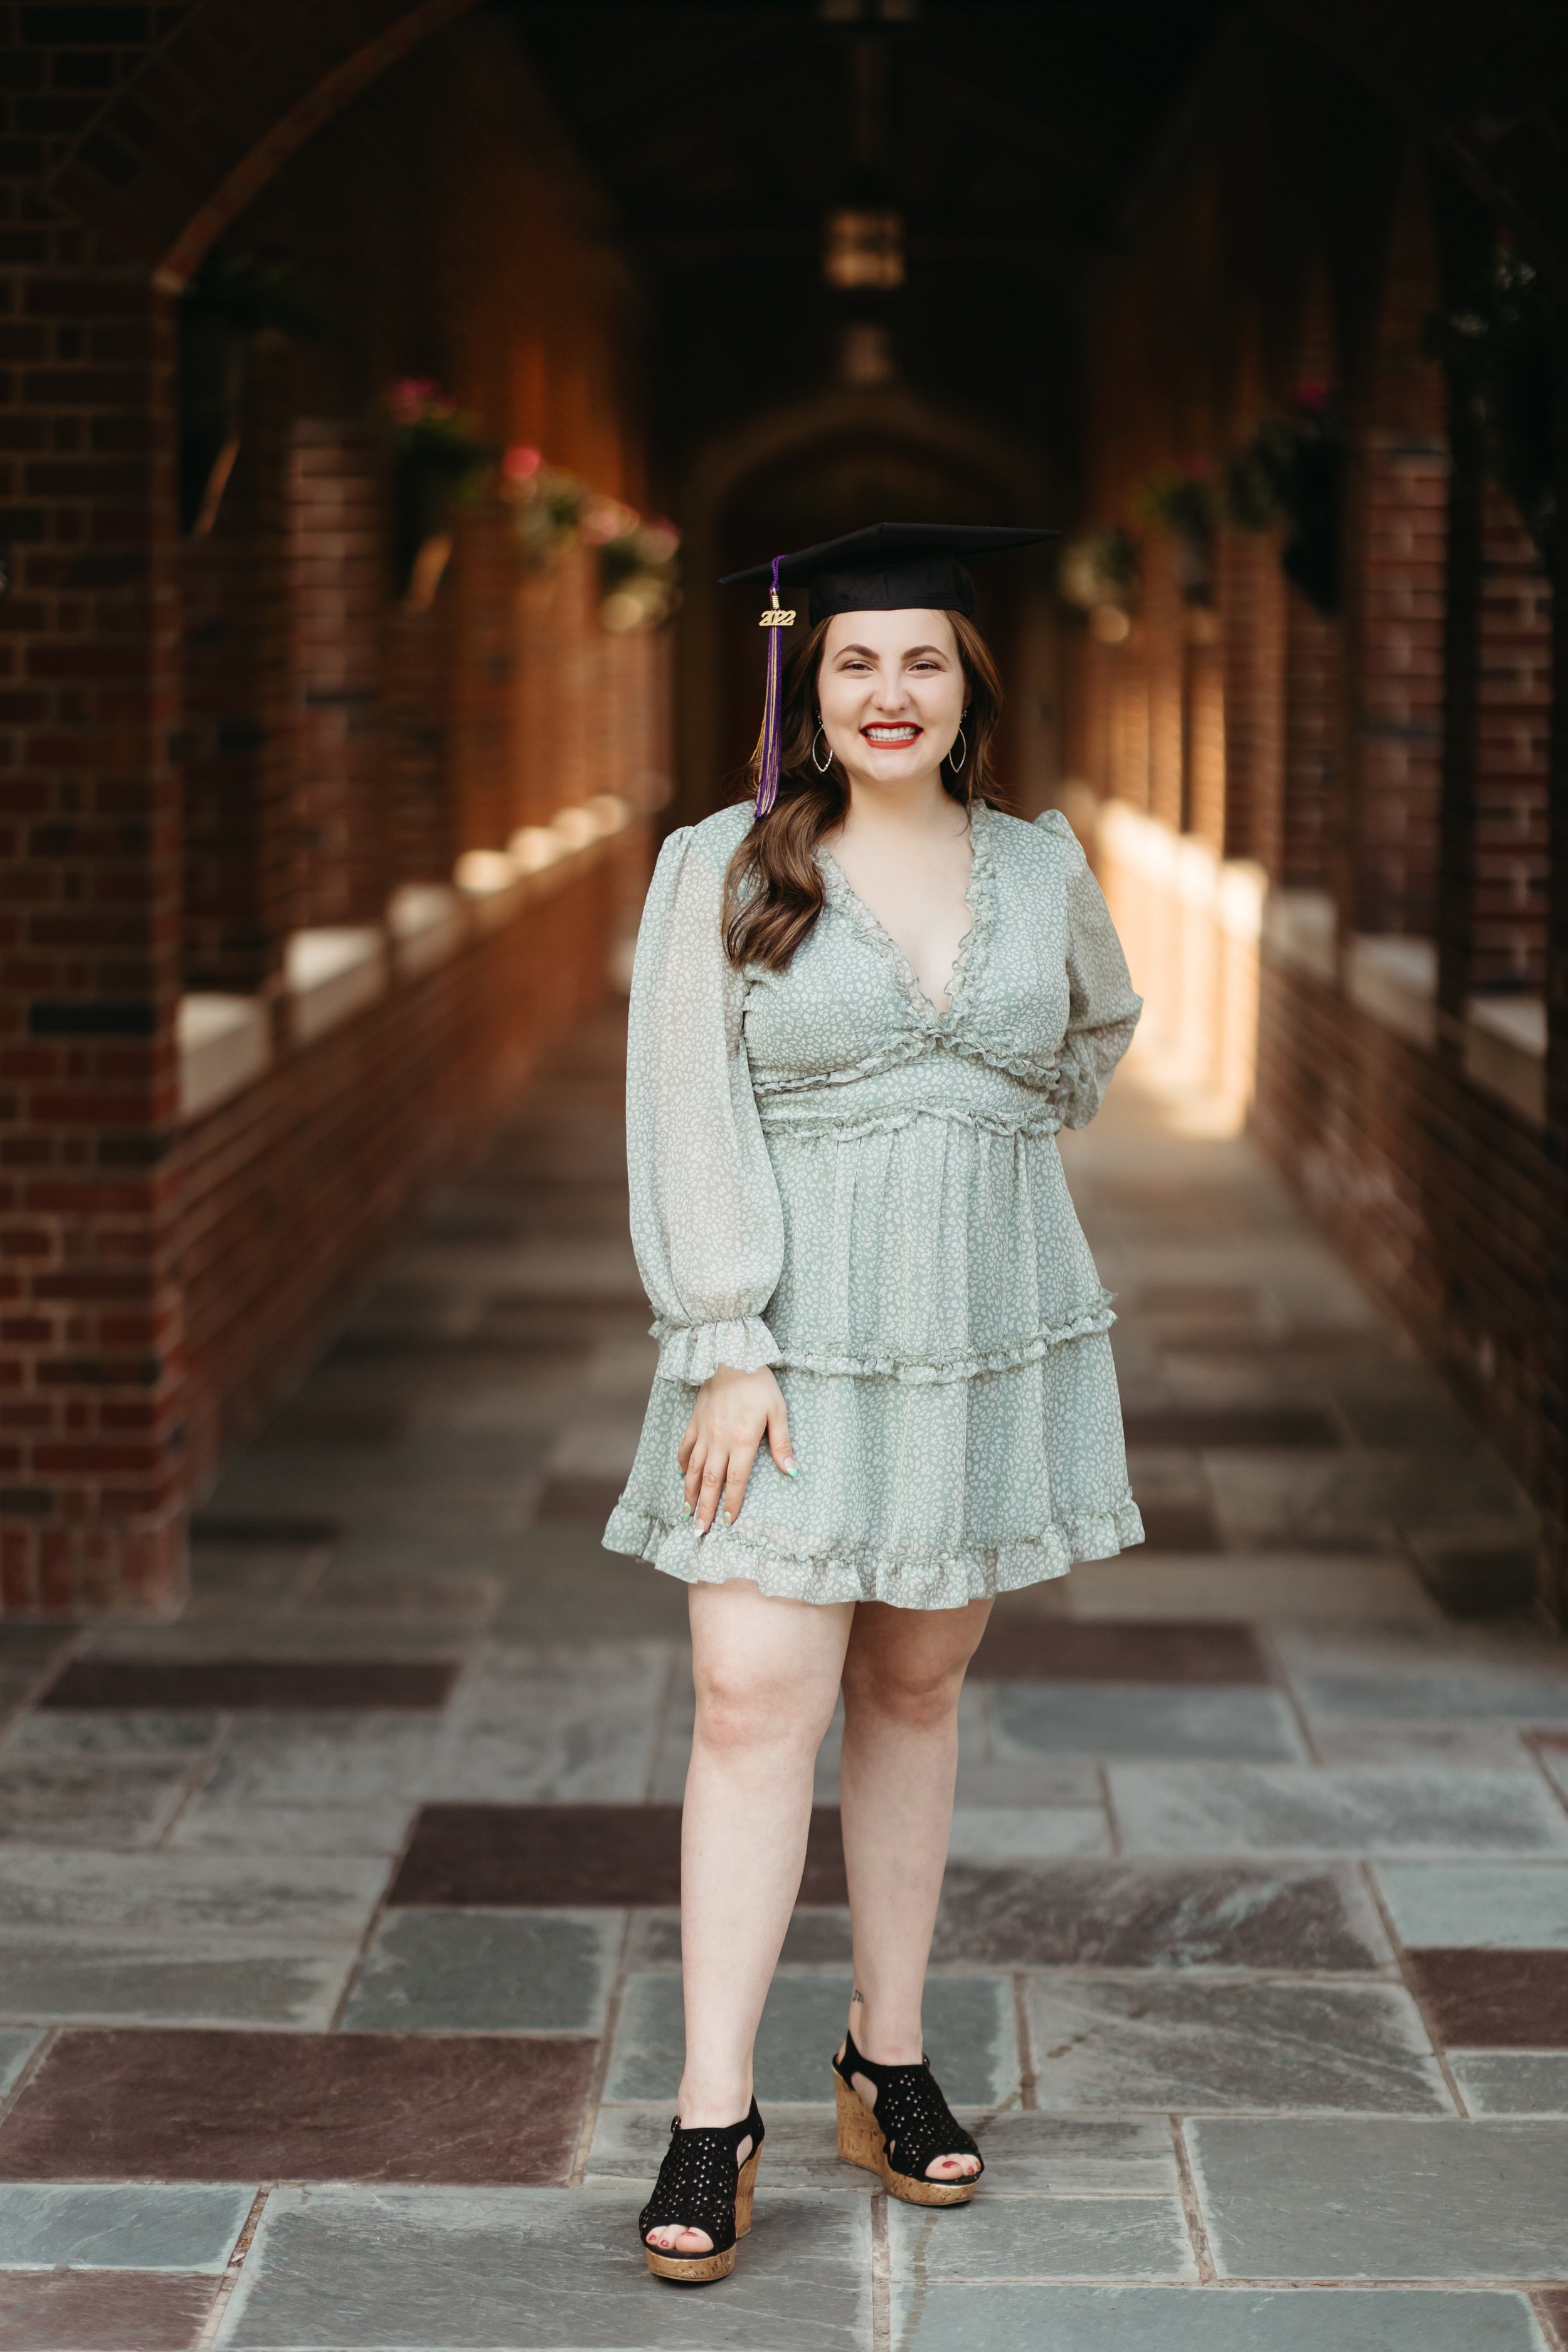  college graduation photos | college graduation pictures | cap and gown pictures | what to wear under cap and gown | what to wear for college graduation photoshoot | college graduation photoshoot | college graduation photoshoot ideas | outdoor colleg